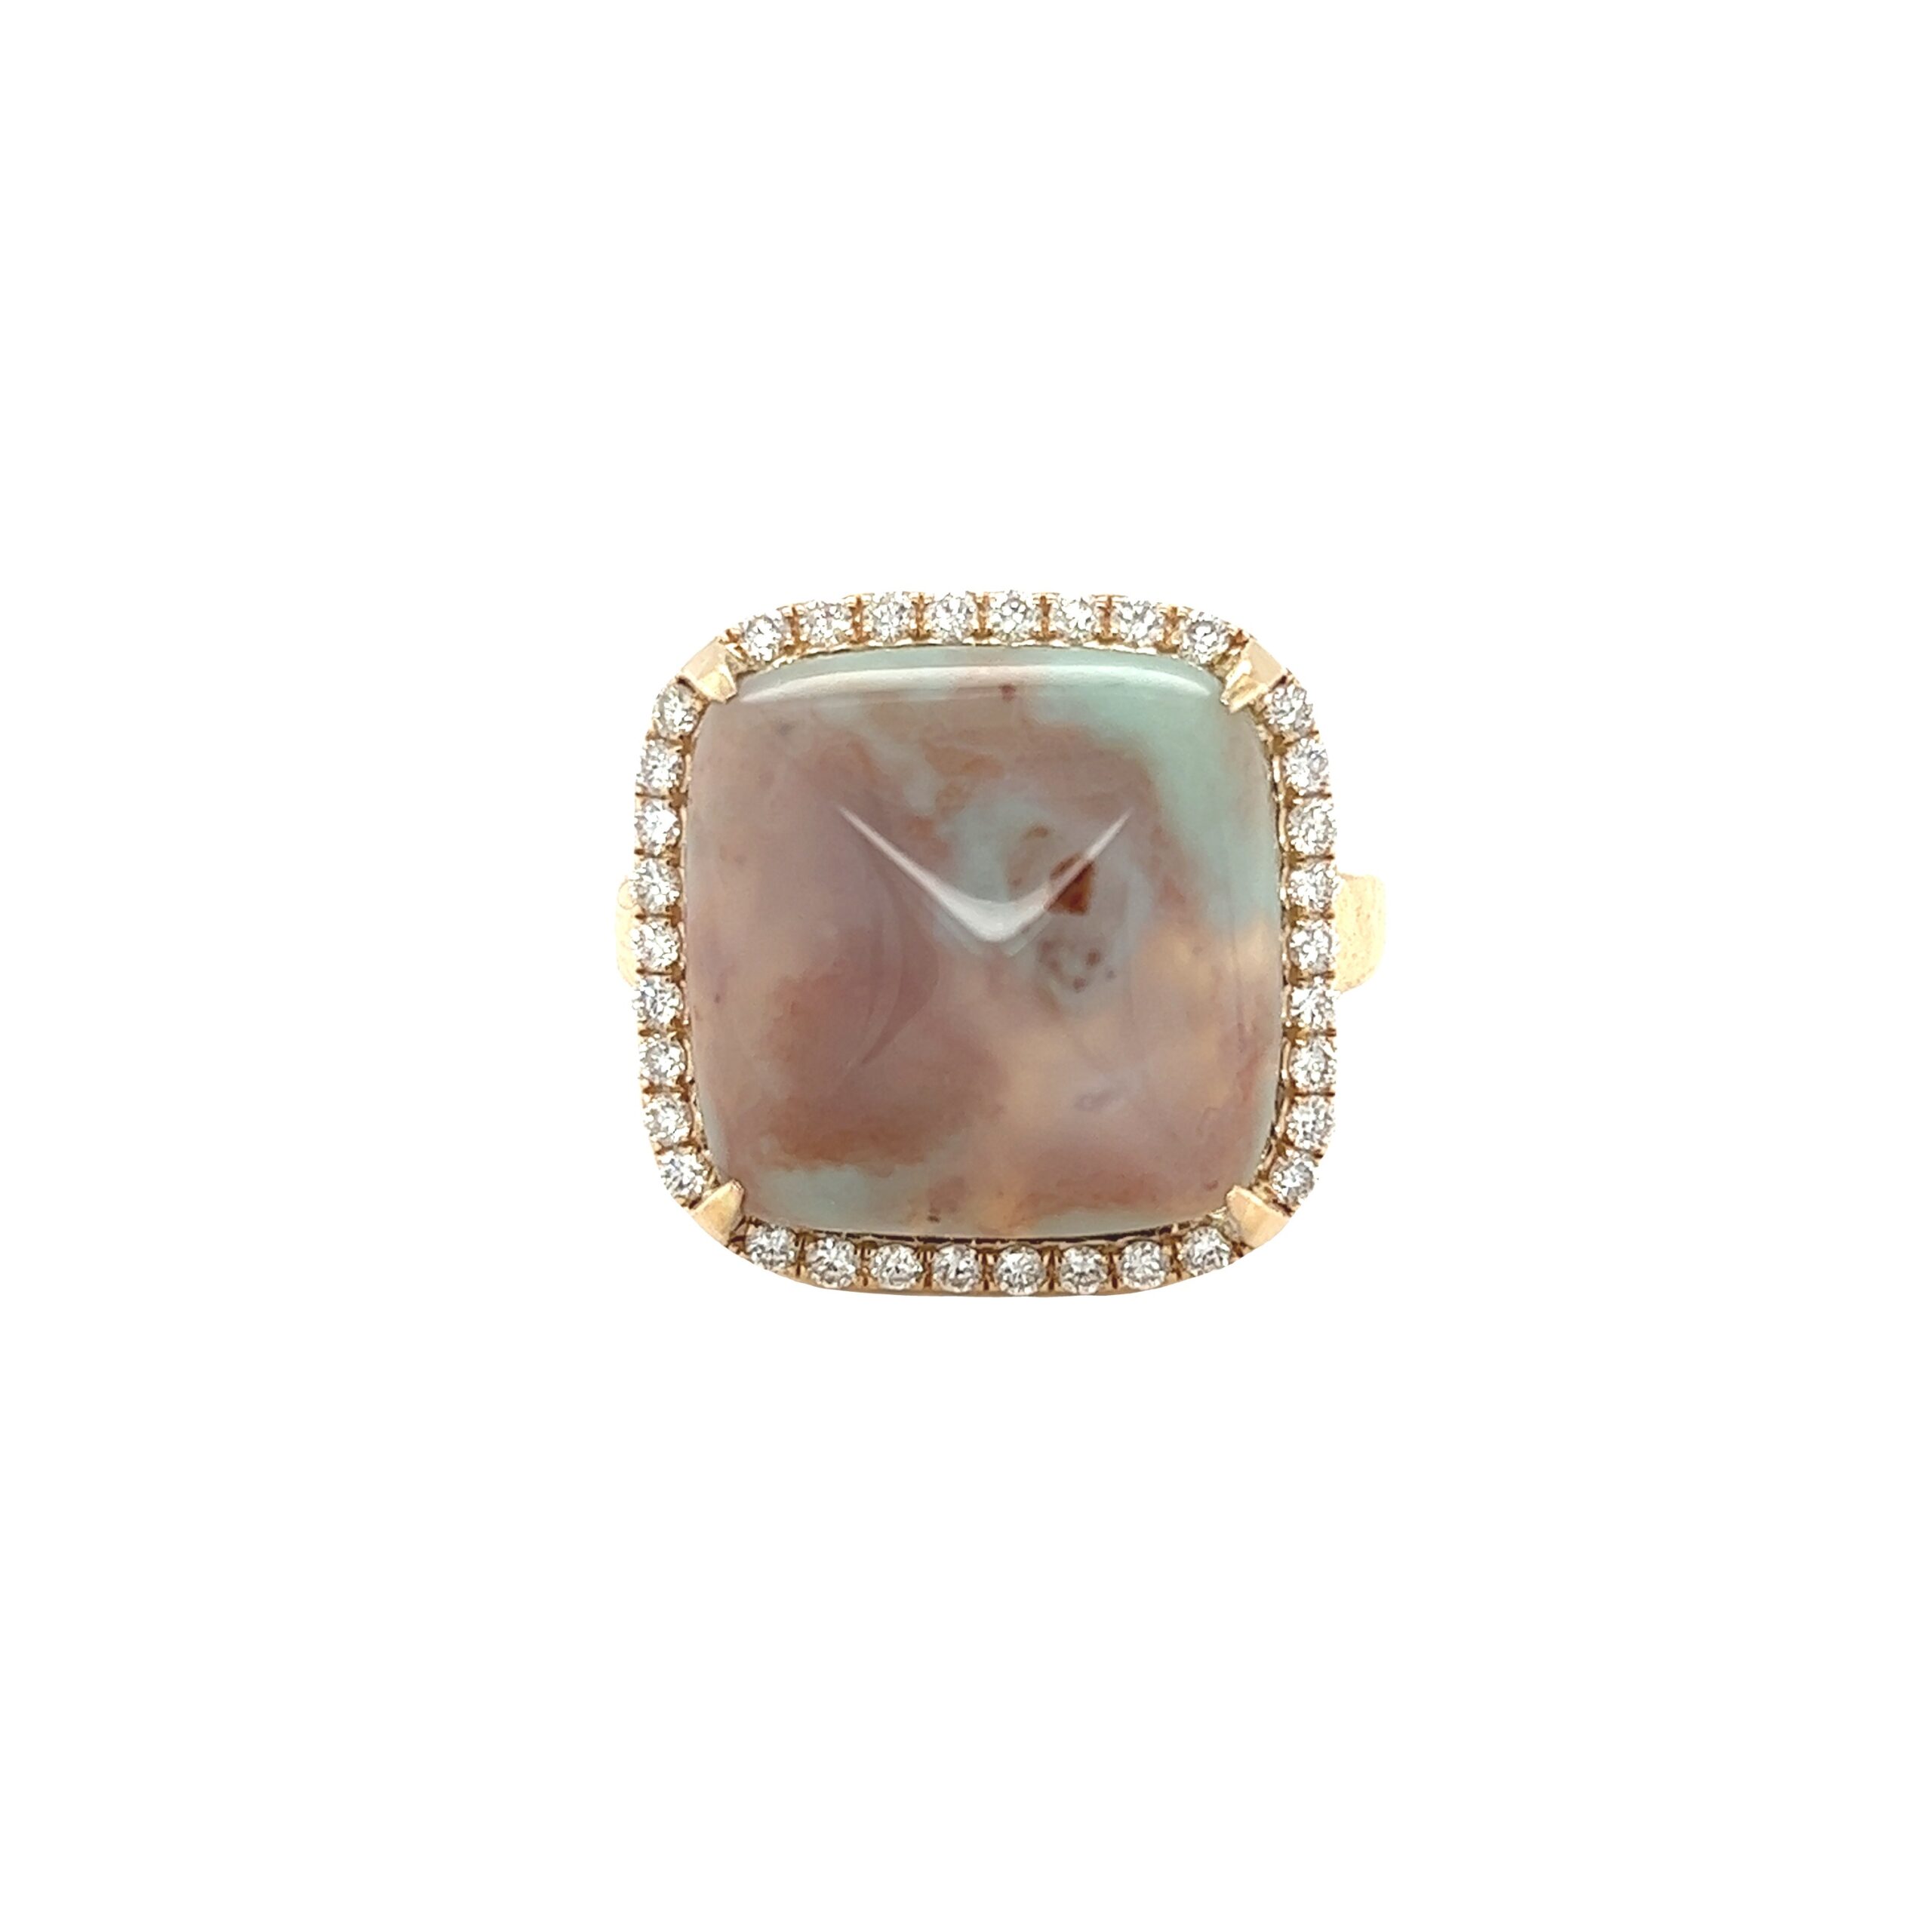 Featured image for “One of a kind Square Aquaphrase Ring”